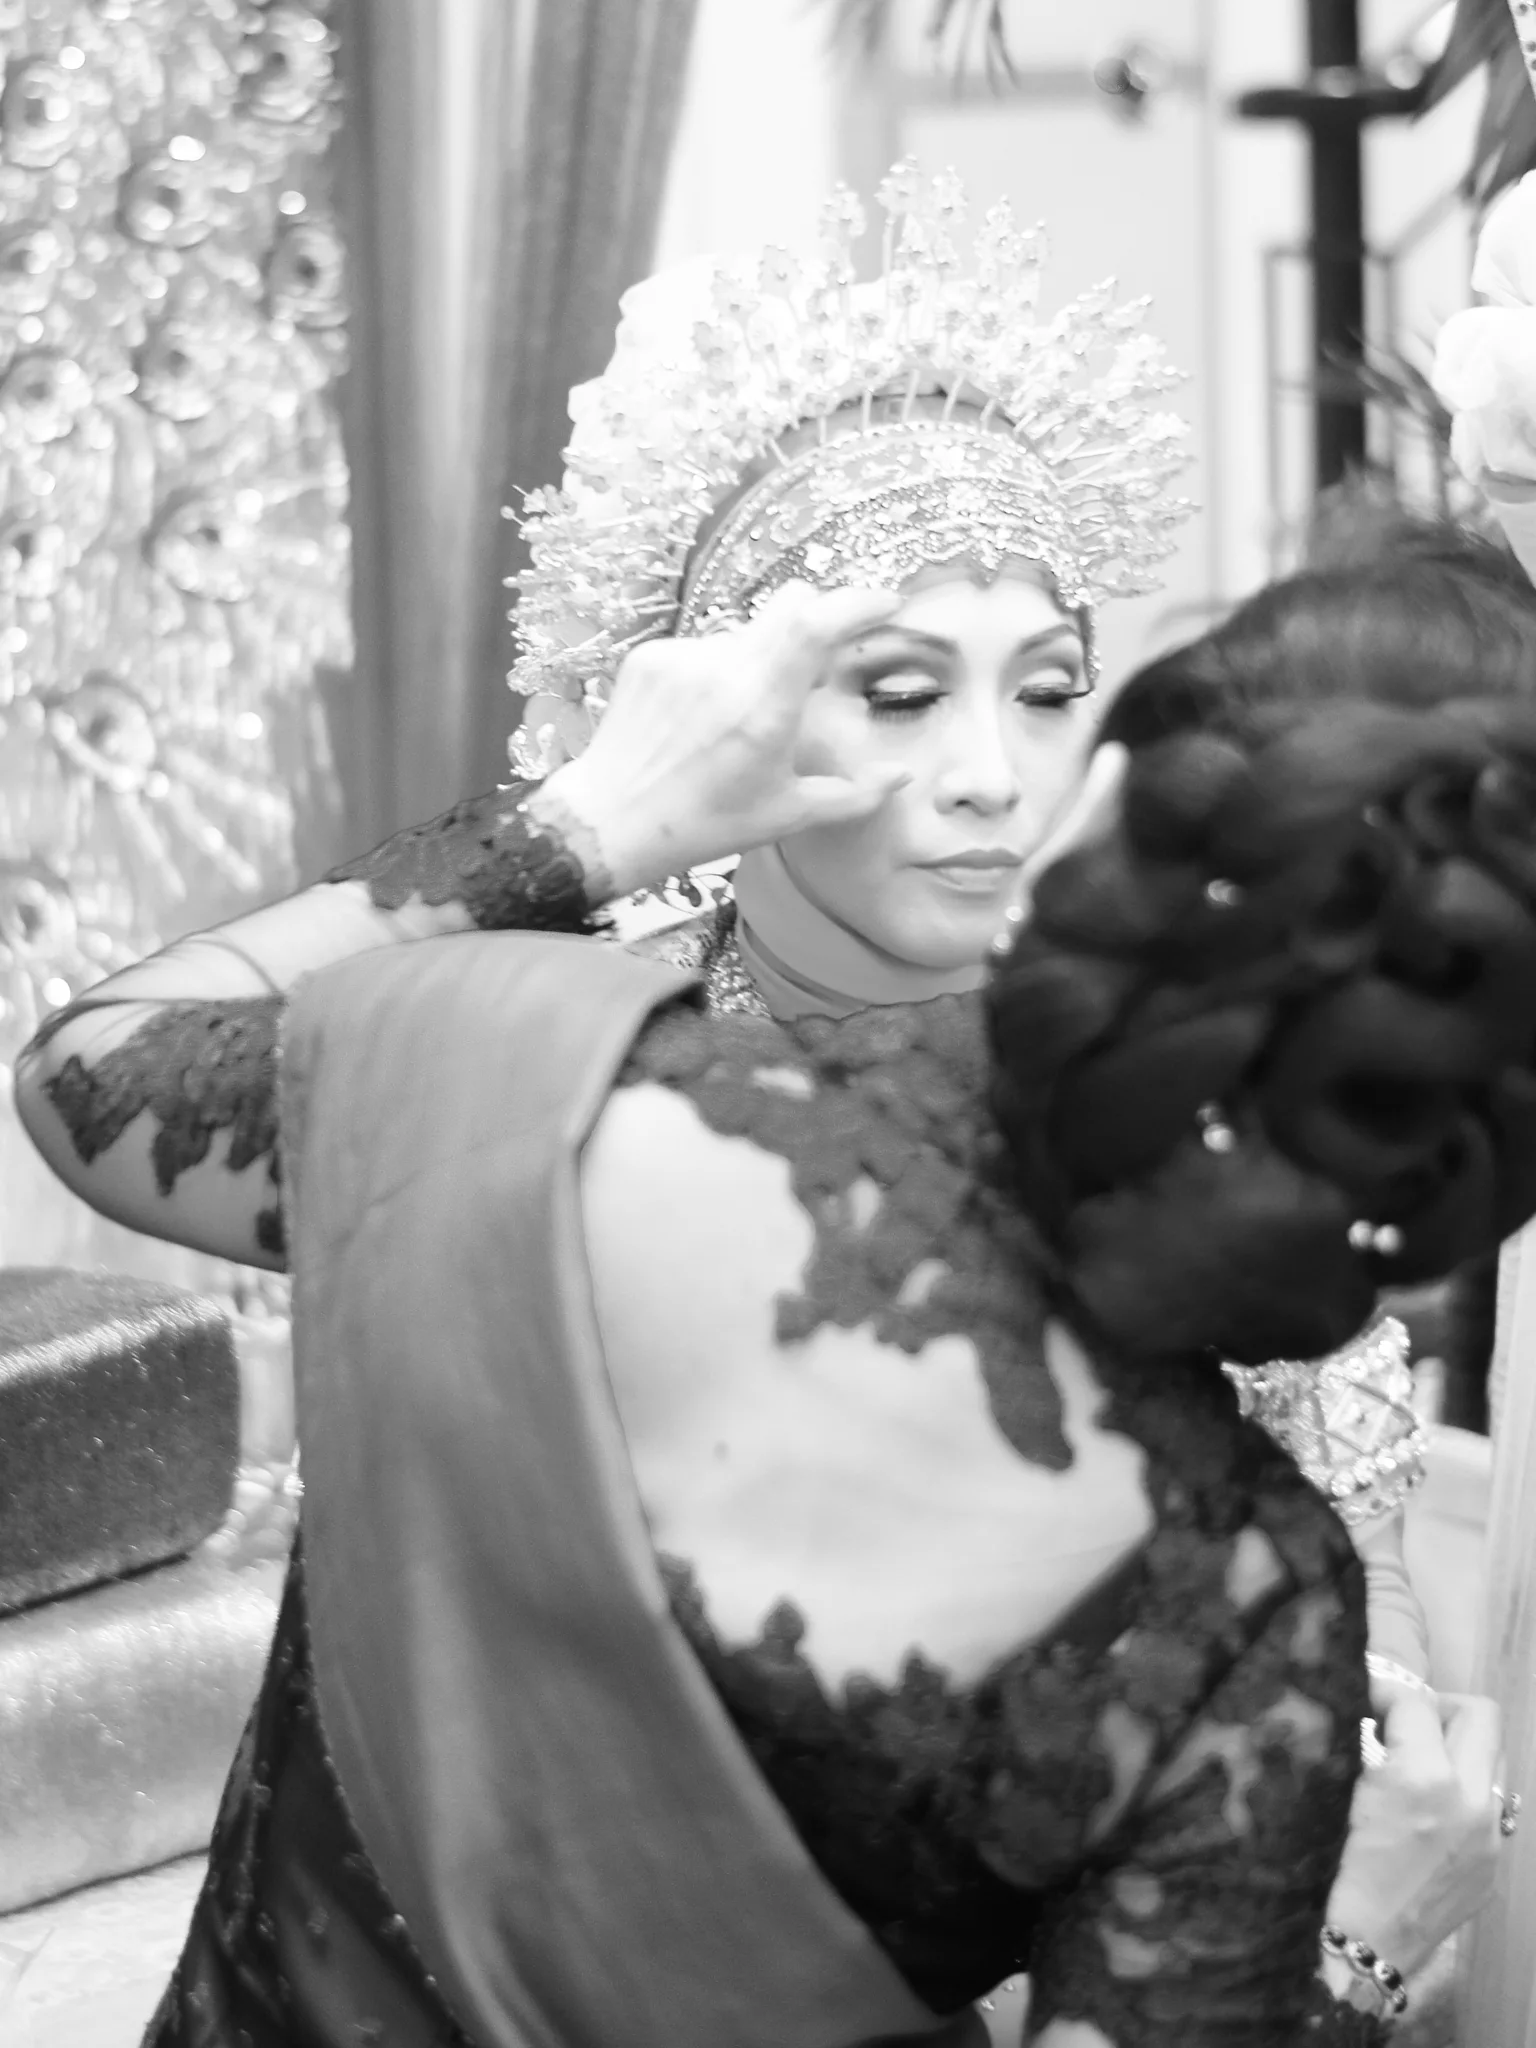 During the Mappacci, very close family members and special guests are invited to give blessings to the bride and place henna on her hands.